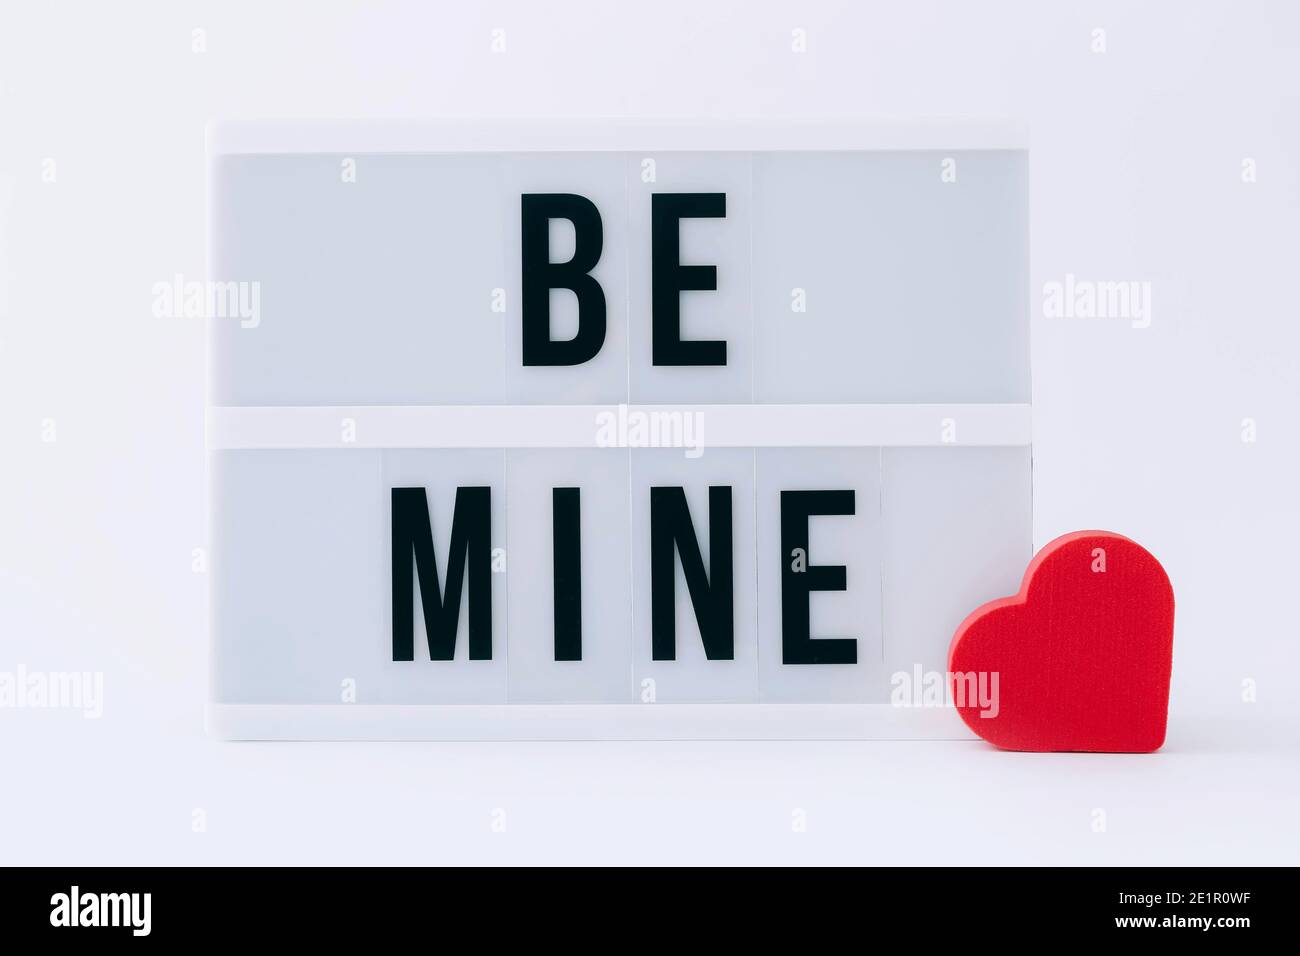 Be mine lightbox message with red heart sponge on a light background Stock Photo